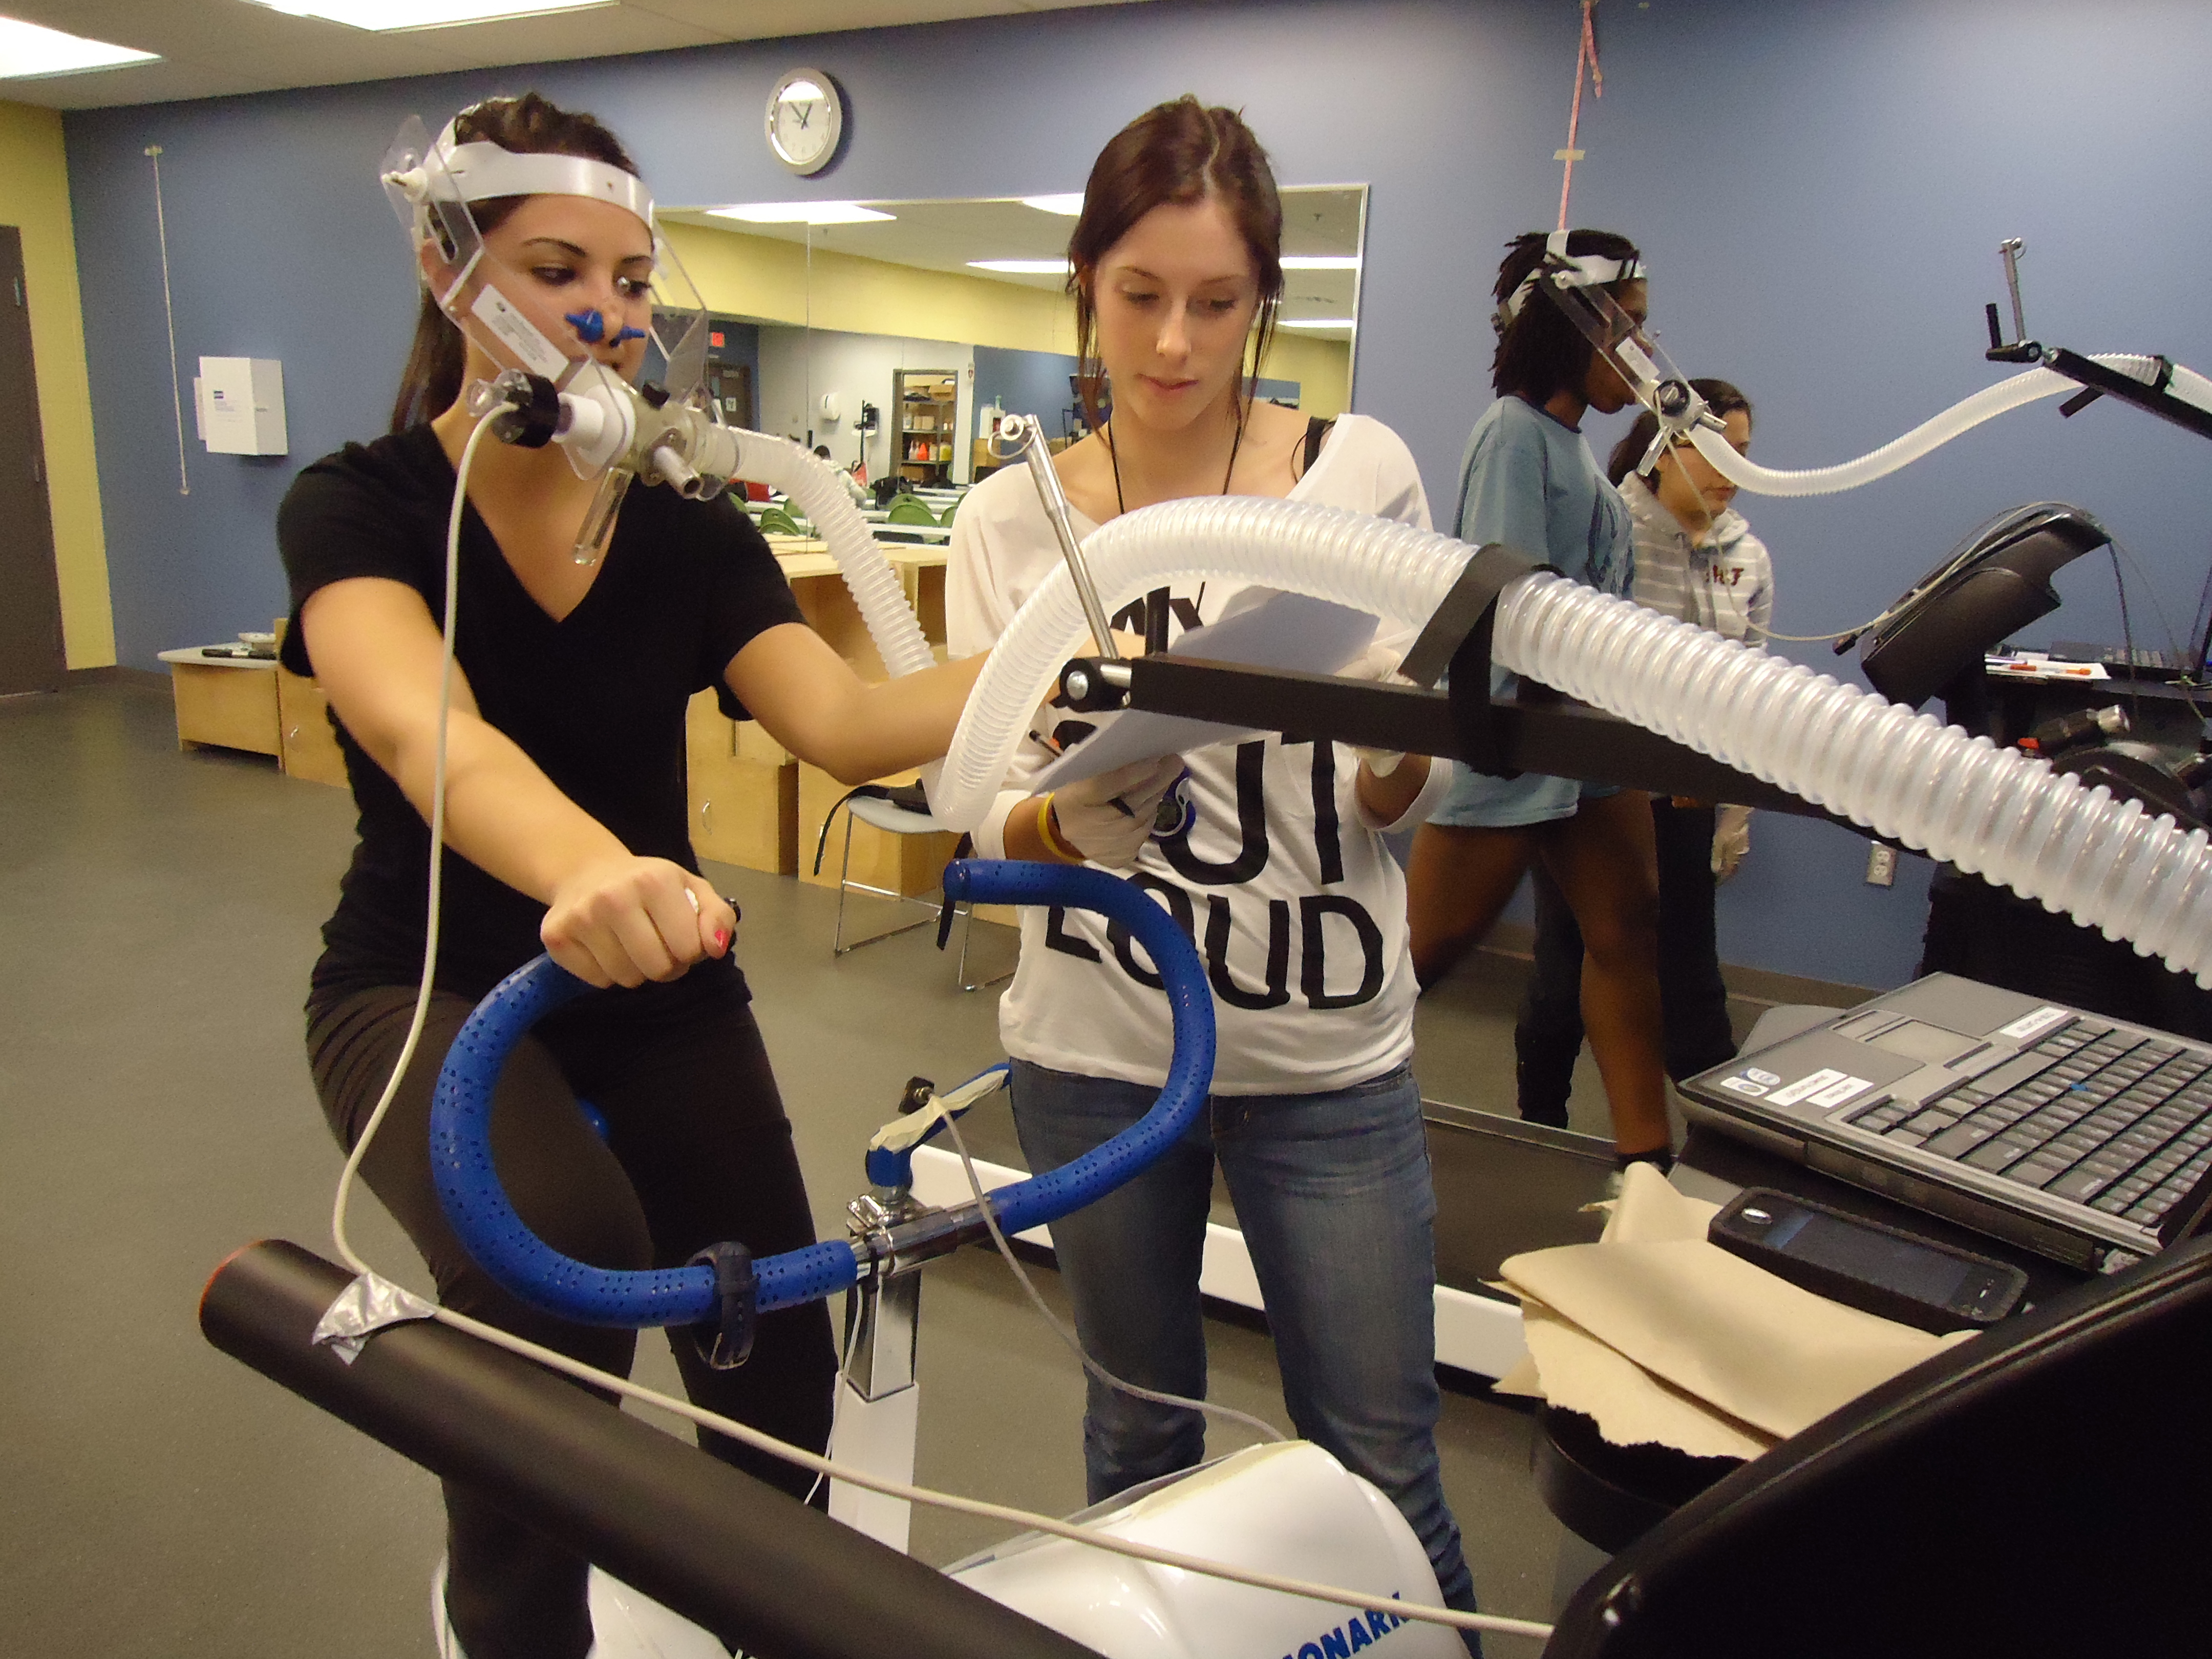 An Exercise Science student discovers what an exercise science program is by using advanced monitors in the lab.